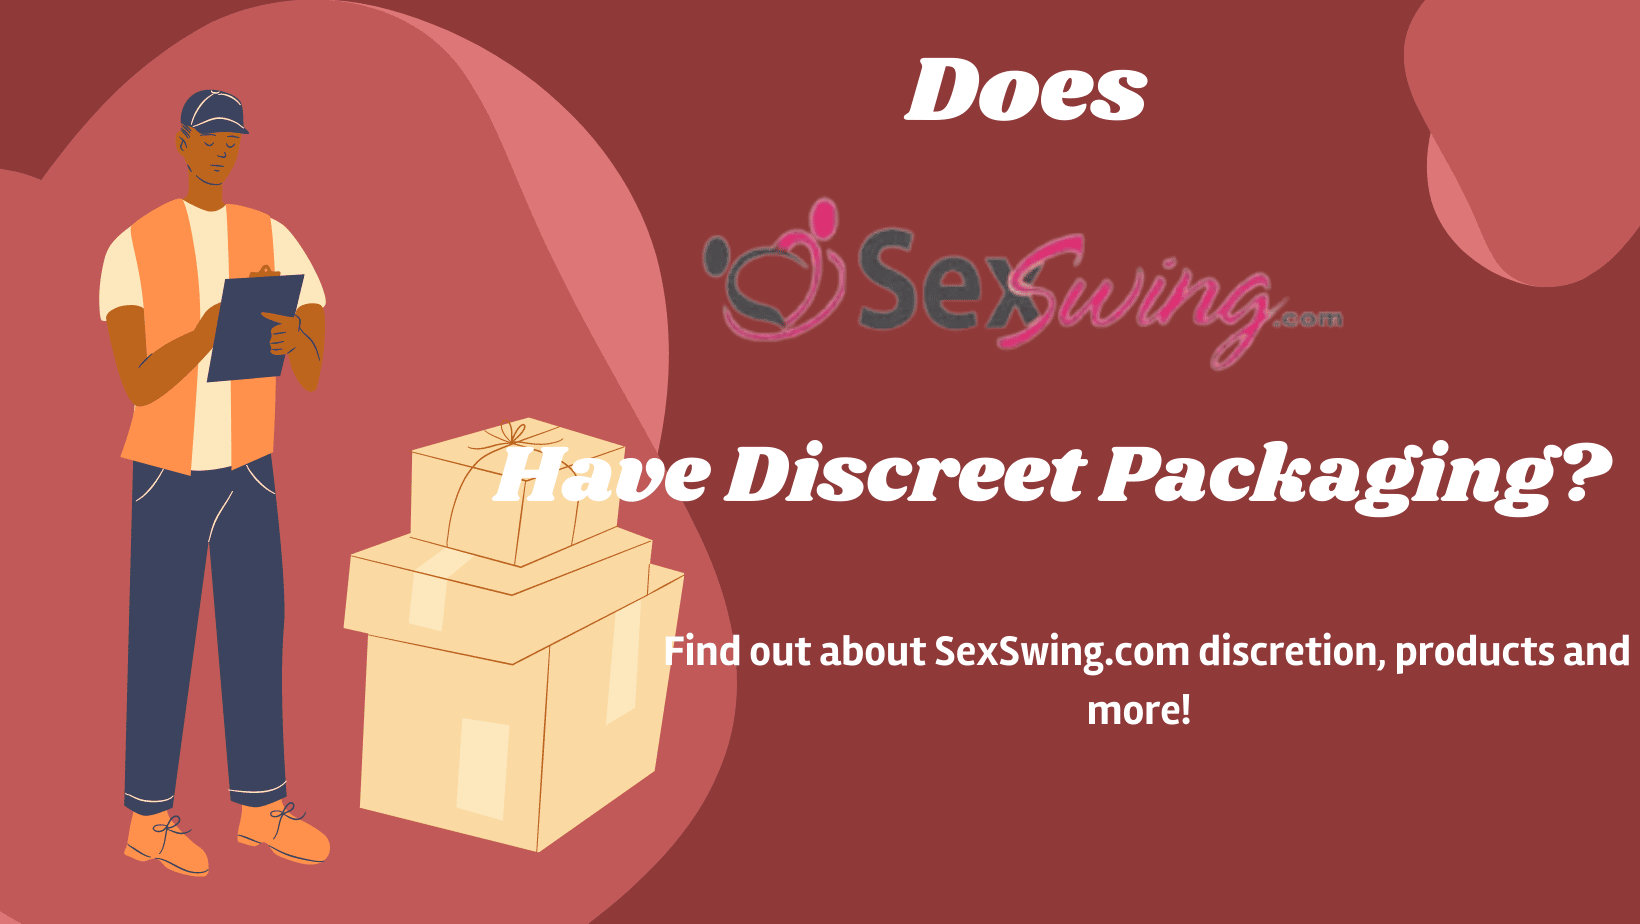 Does SexSwing.com Have Discreet Packaging?